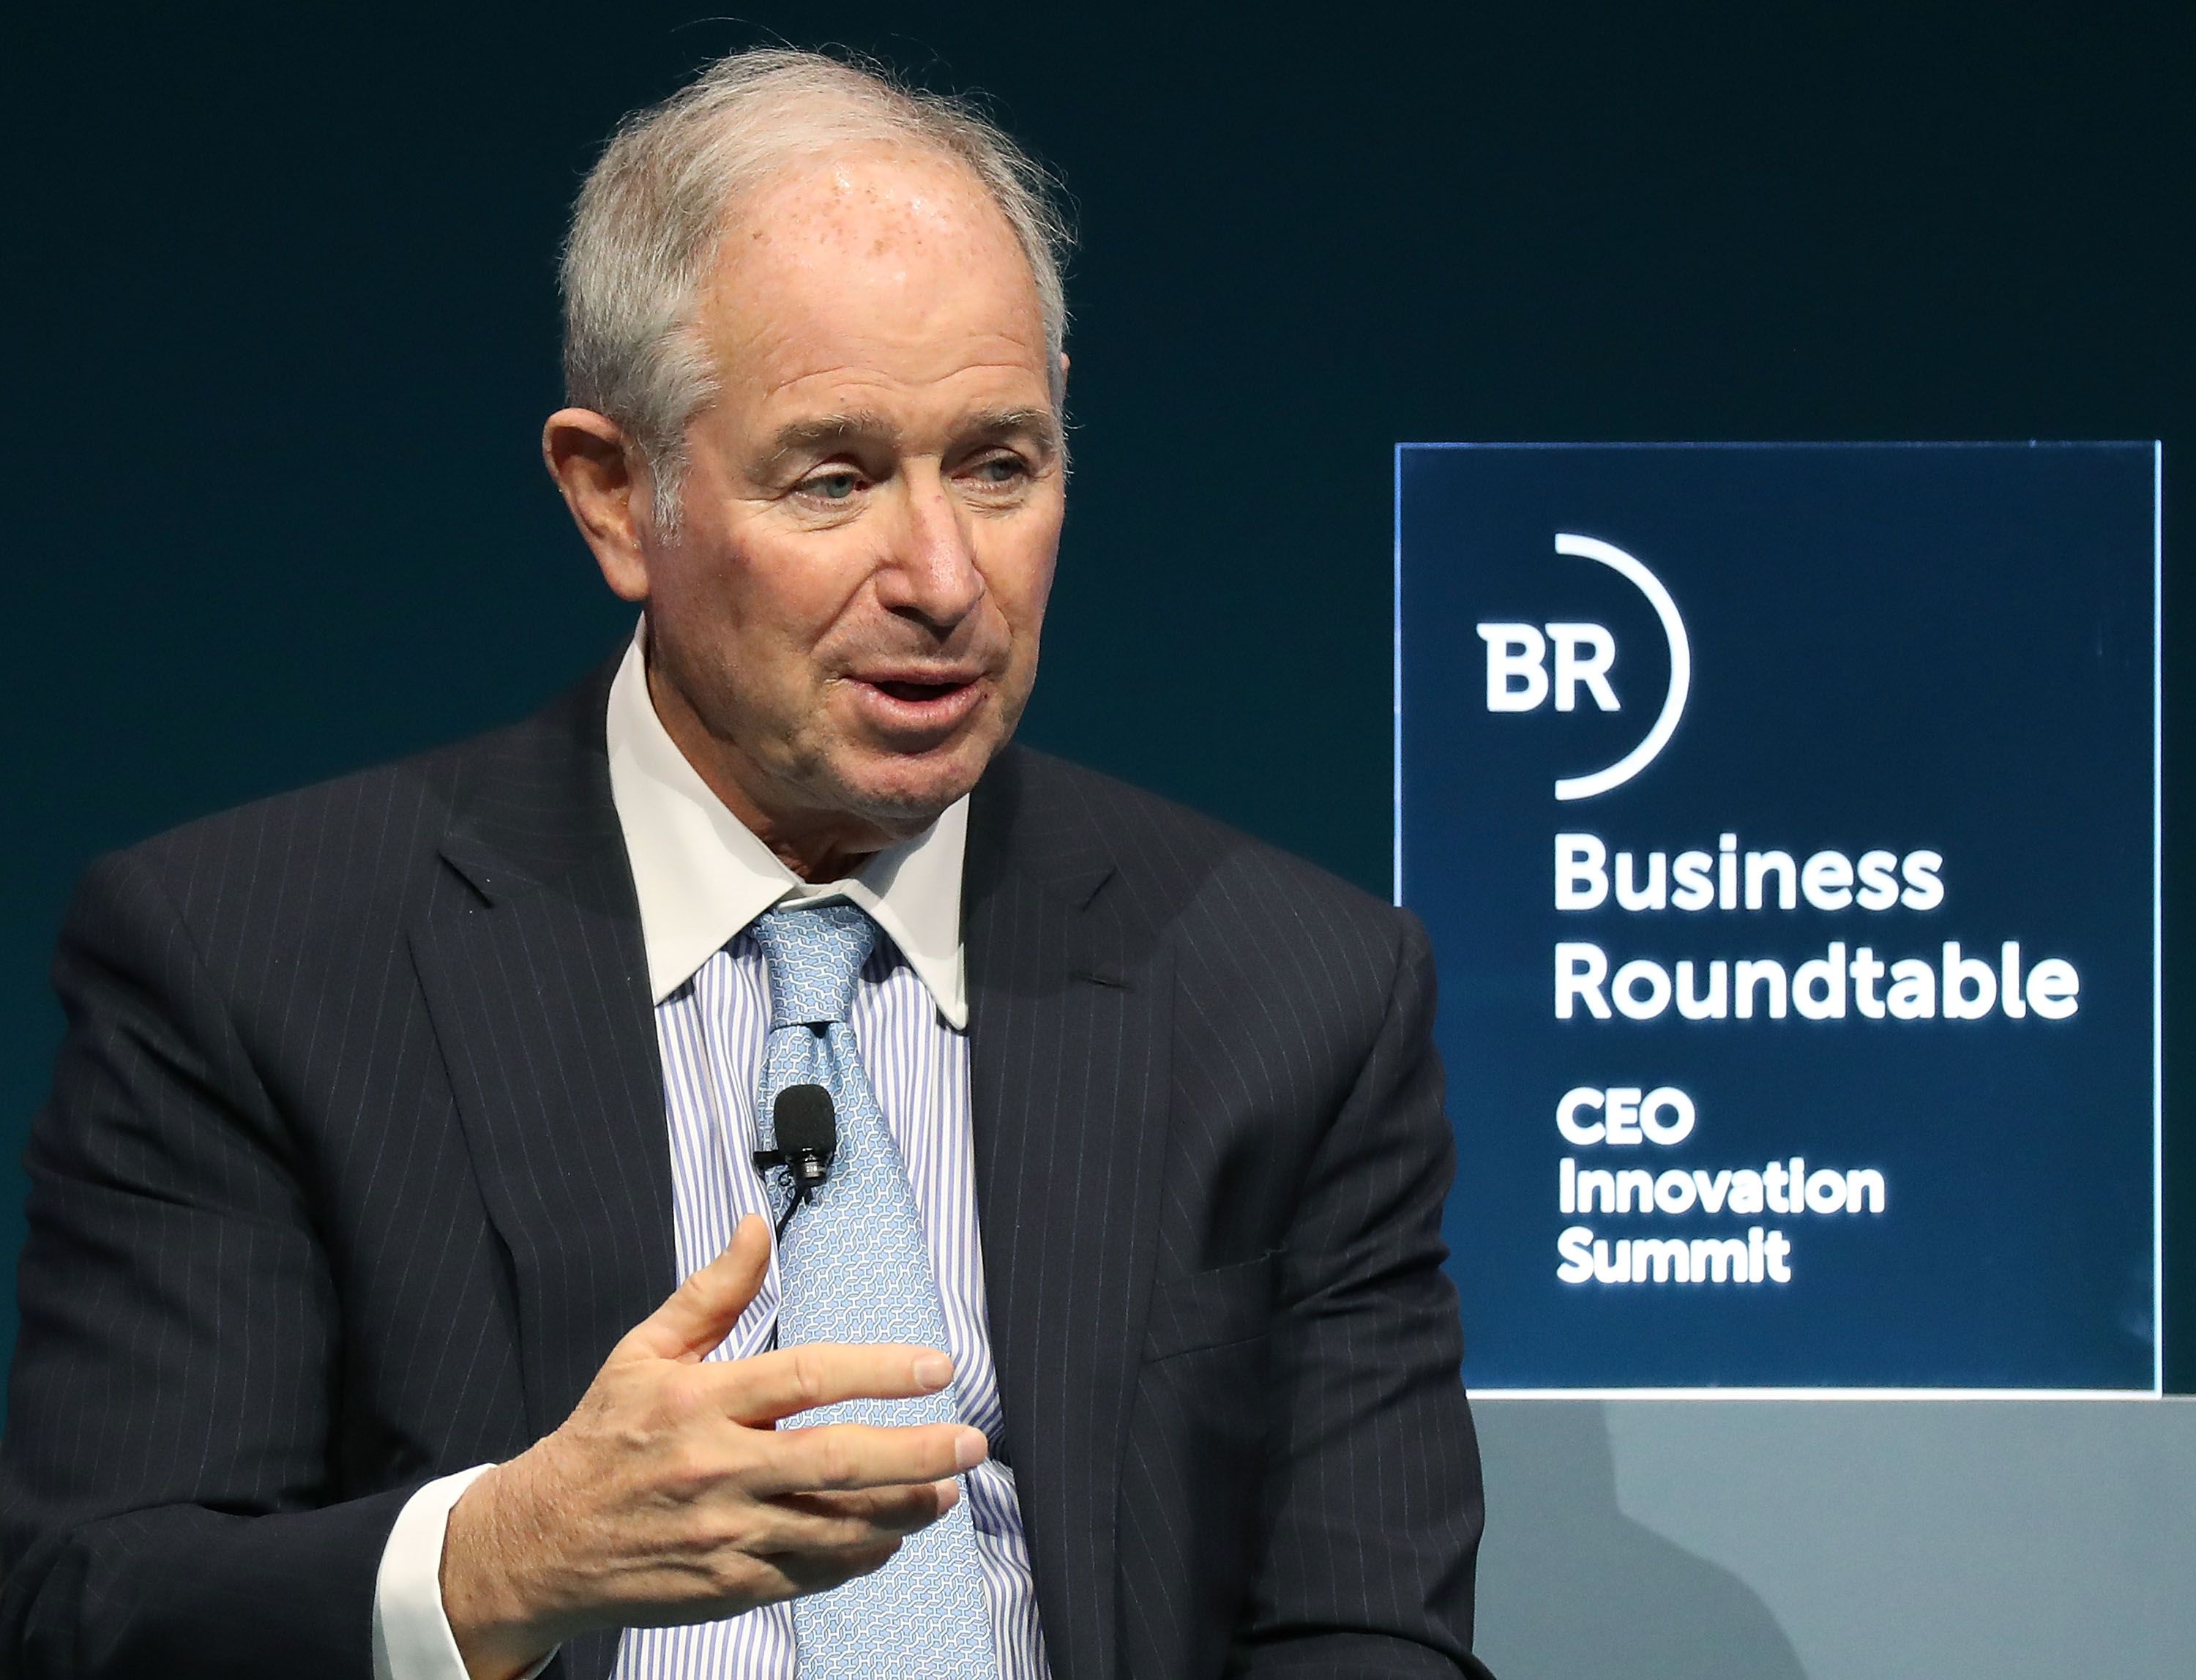 Steve Schwarzman, CEO and co-founder of the Blackstone Group, participates in a Business Roundtable discussion